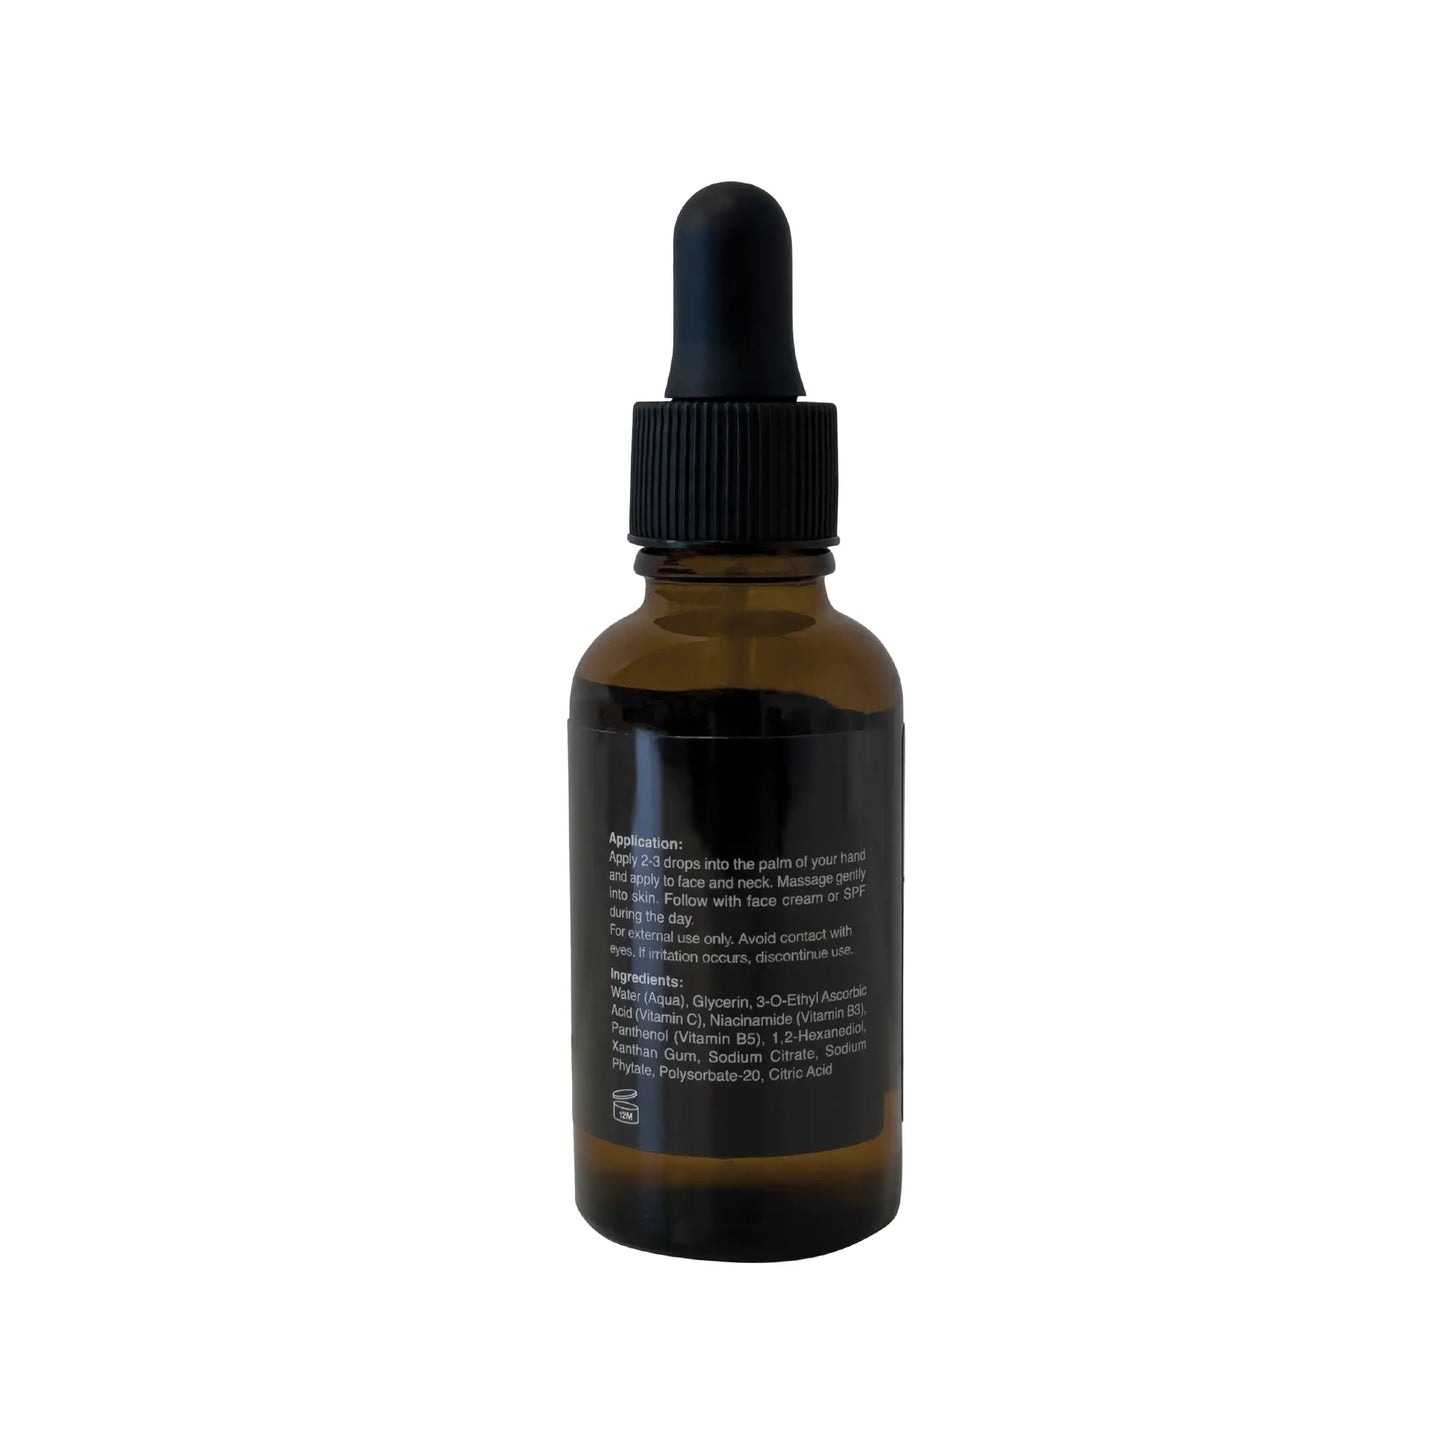 This concentrated Cruisin Organics serum contains Vitamin C, B3, and B5 to hydrate and improve skin's appearance. Suitable for all skin types and daily use.